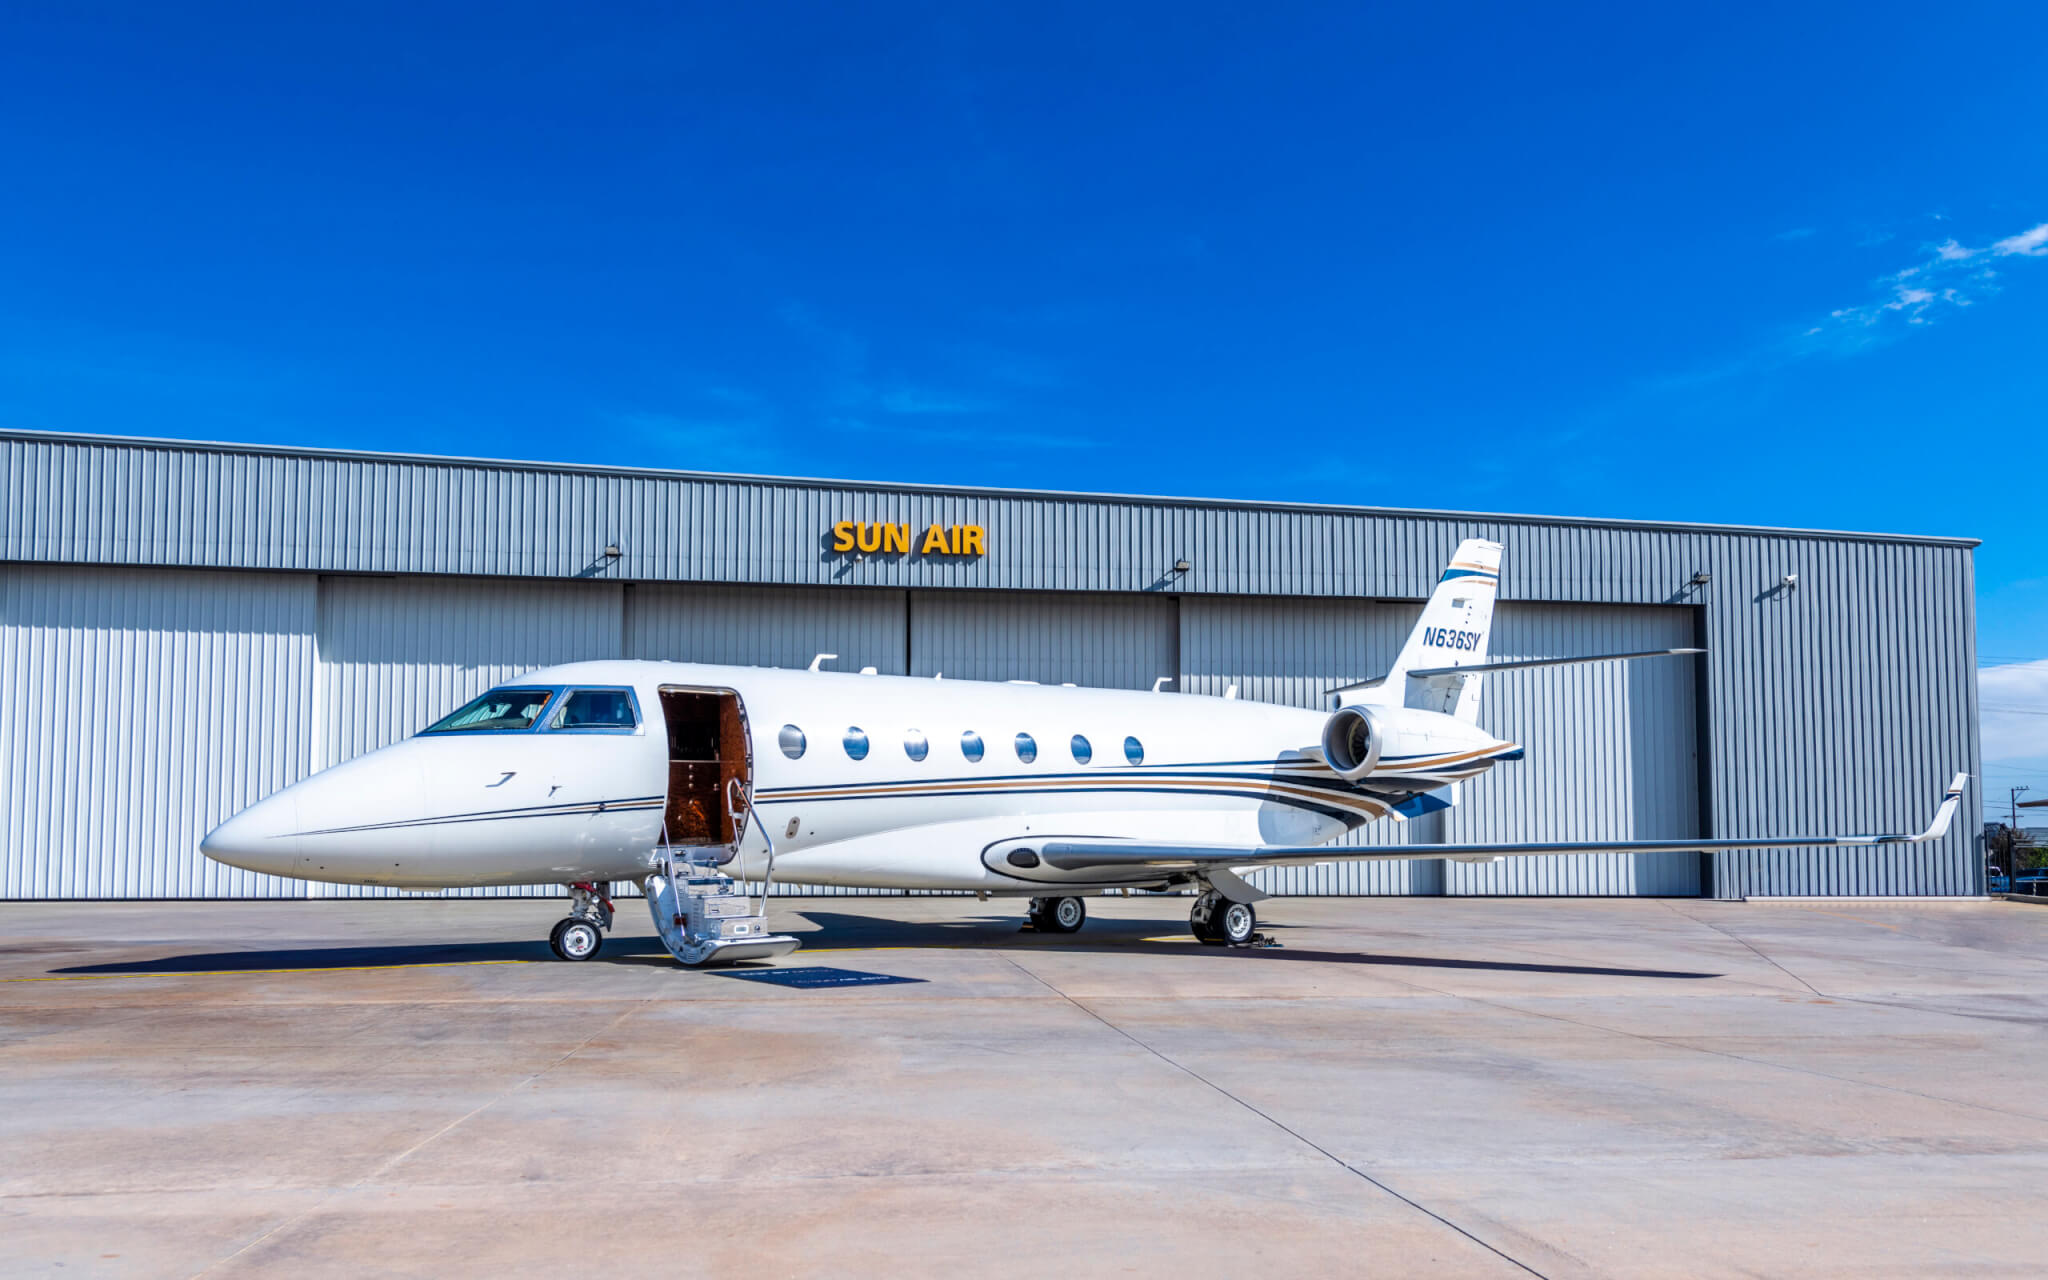 How to Plan a Private Jet Vacation - Sun Air Jets